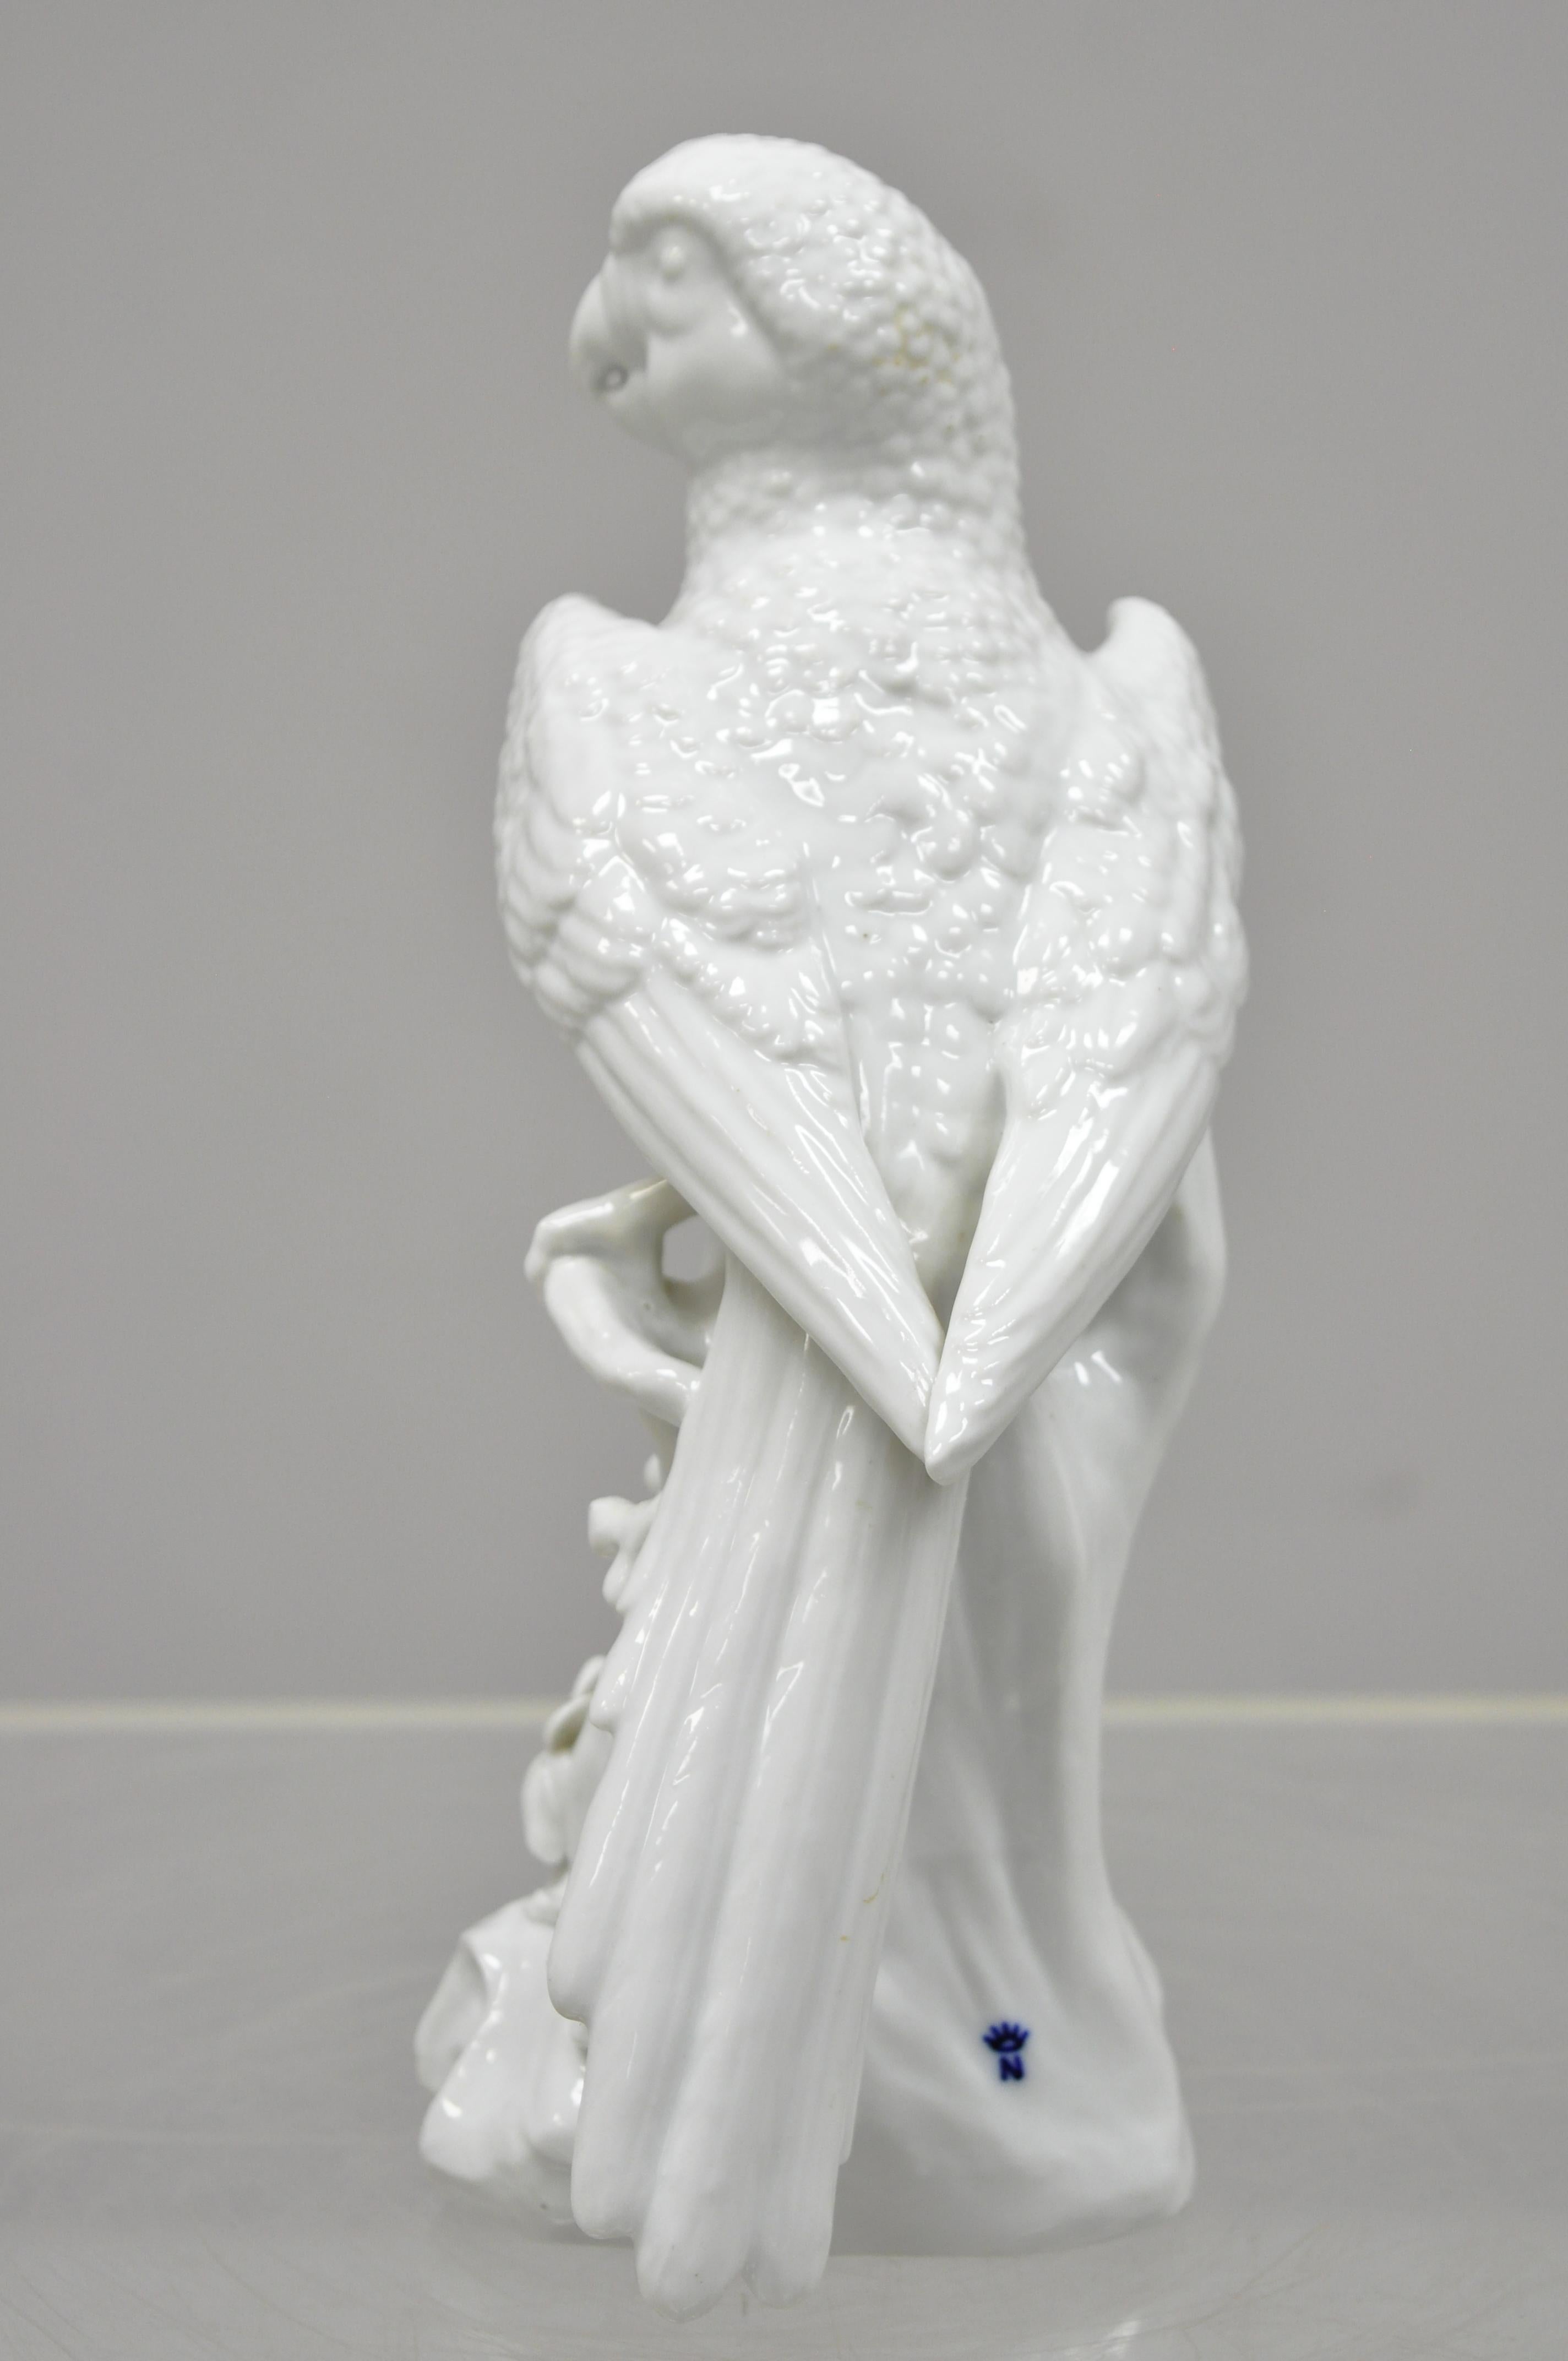 White Porcelain Parrot Figure Statue 5 Point Crown N Capodimonte or German For Sale 1